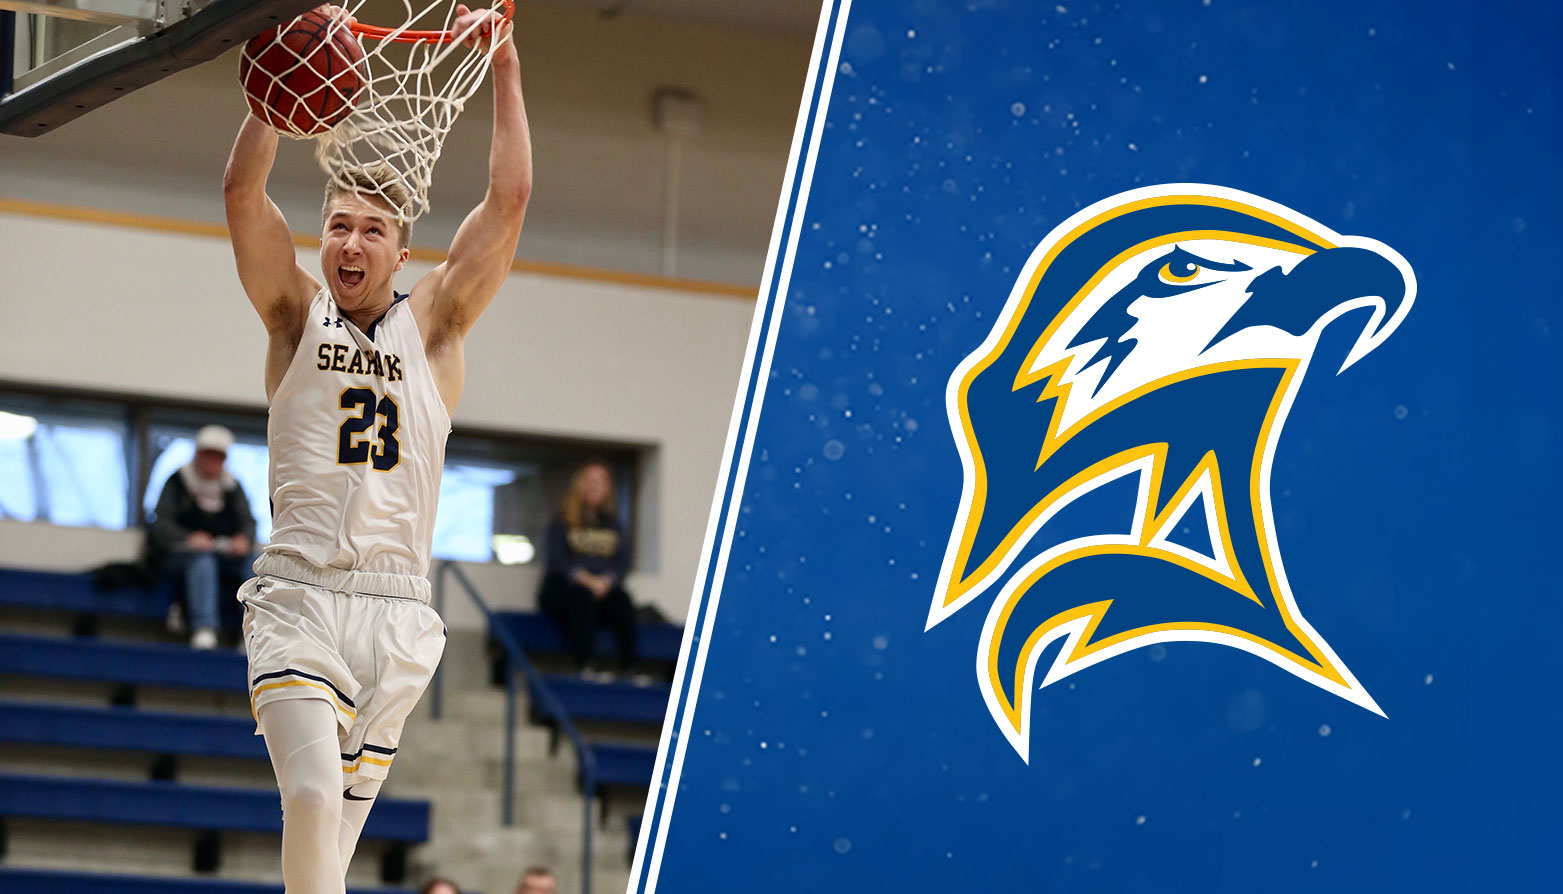 St. Mary's Spencer Schultz Selected CAC Men's Basketball Player of the Week